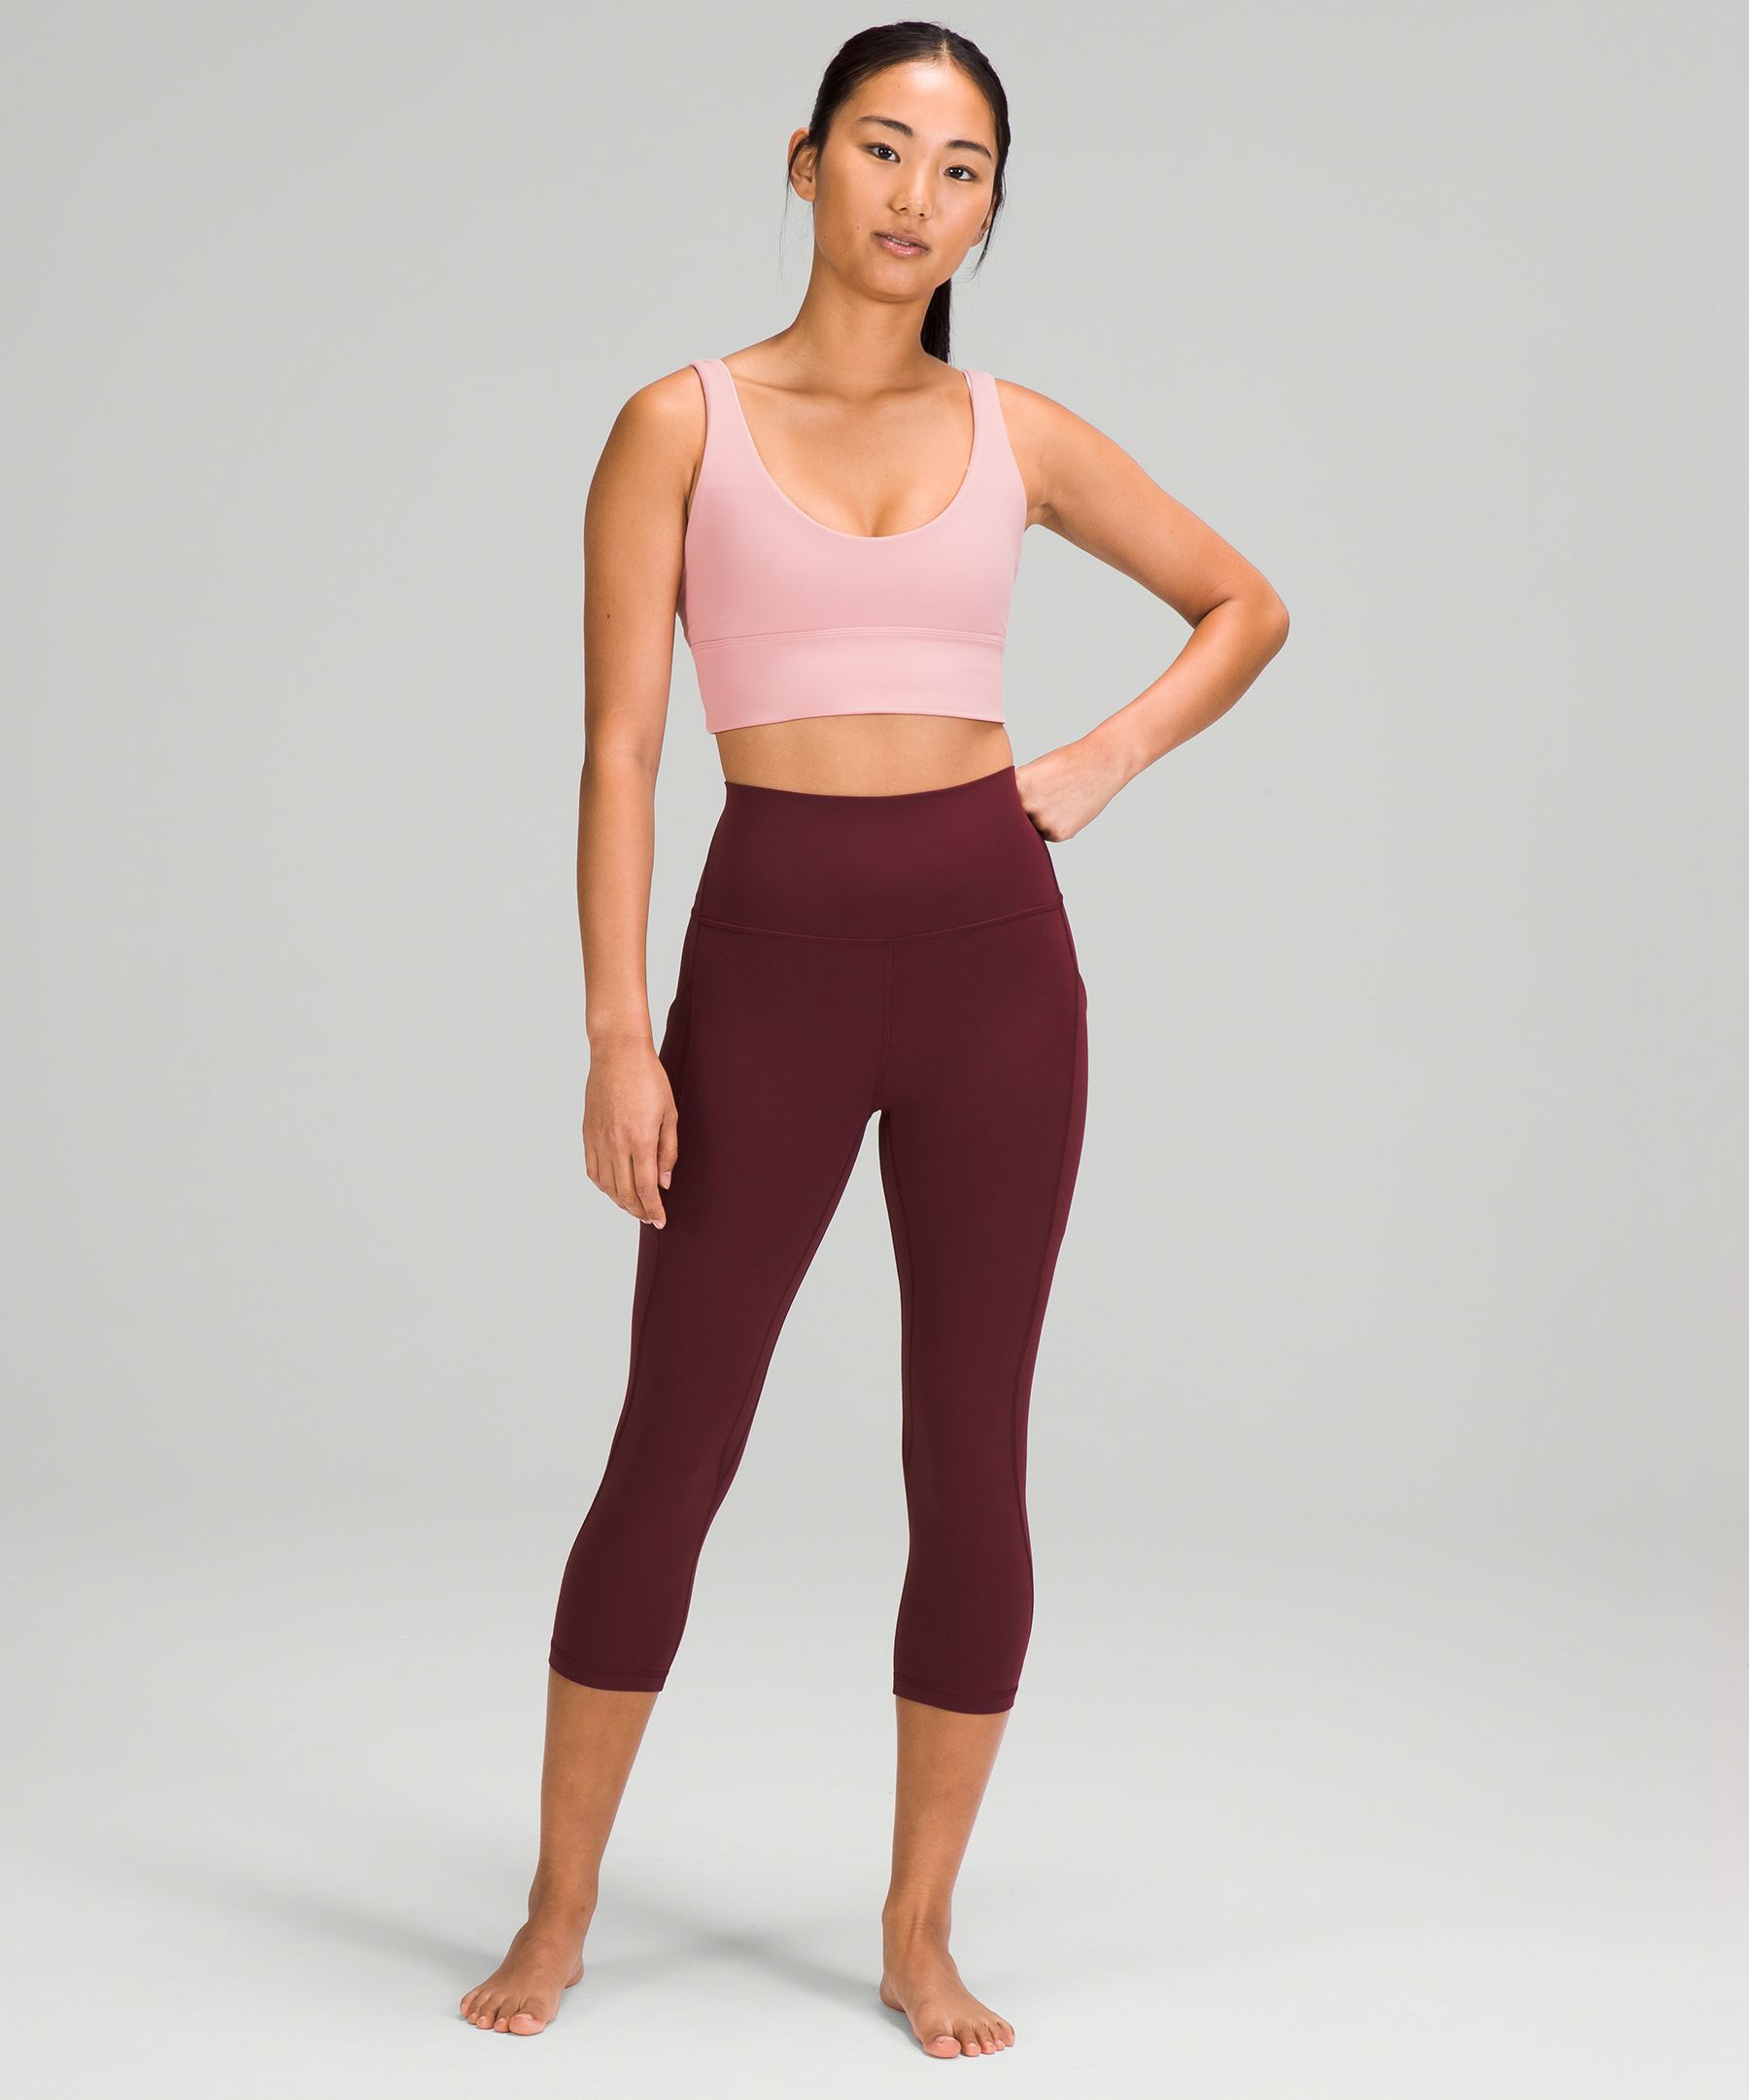 Lululemon Align Reversible Bra *Light Support* Pink Size XS - $32 (44% Off  Retail) - From Kylie